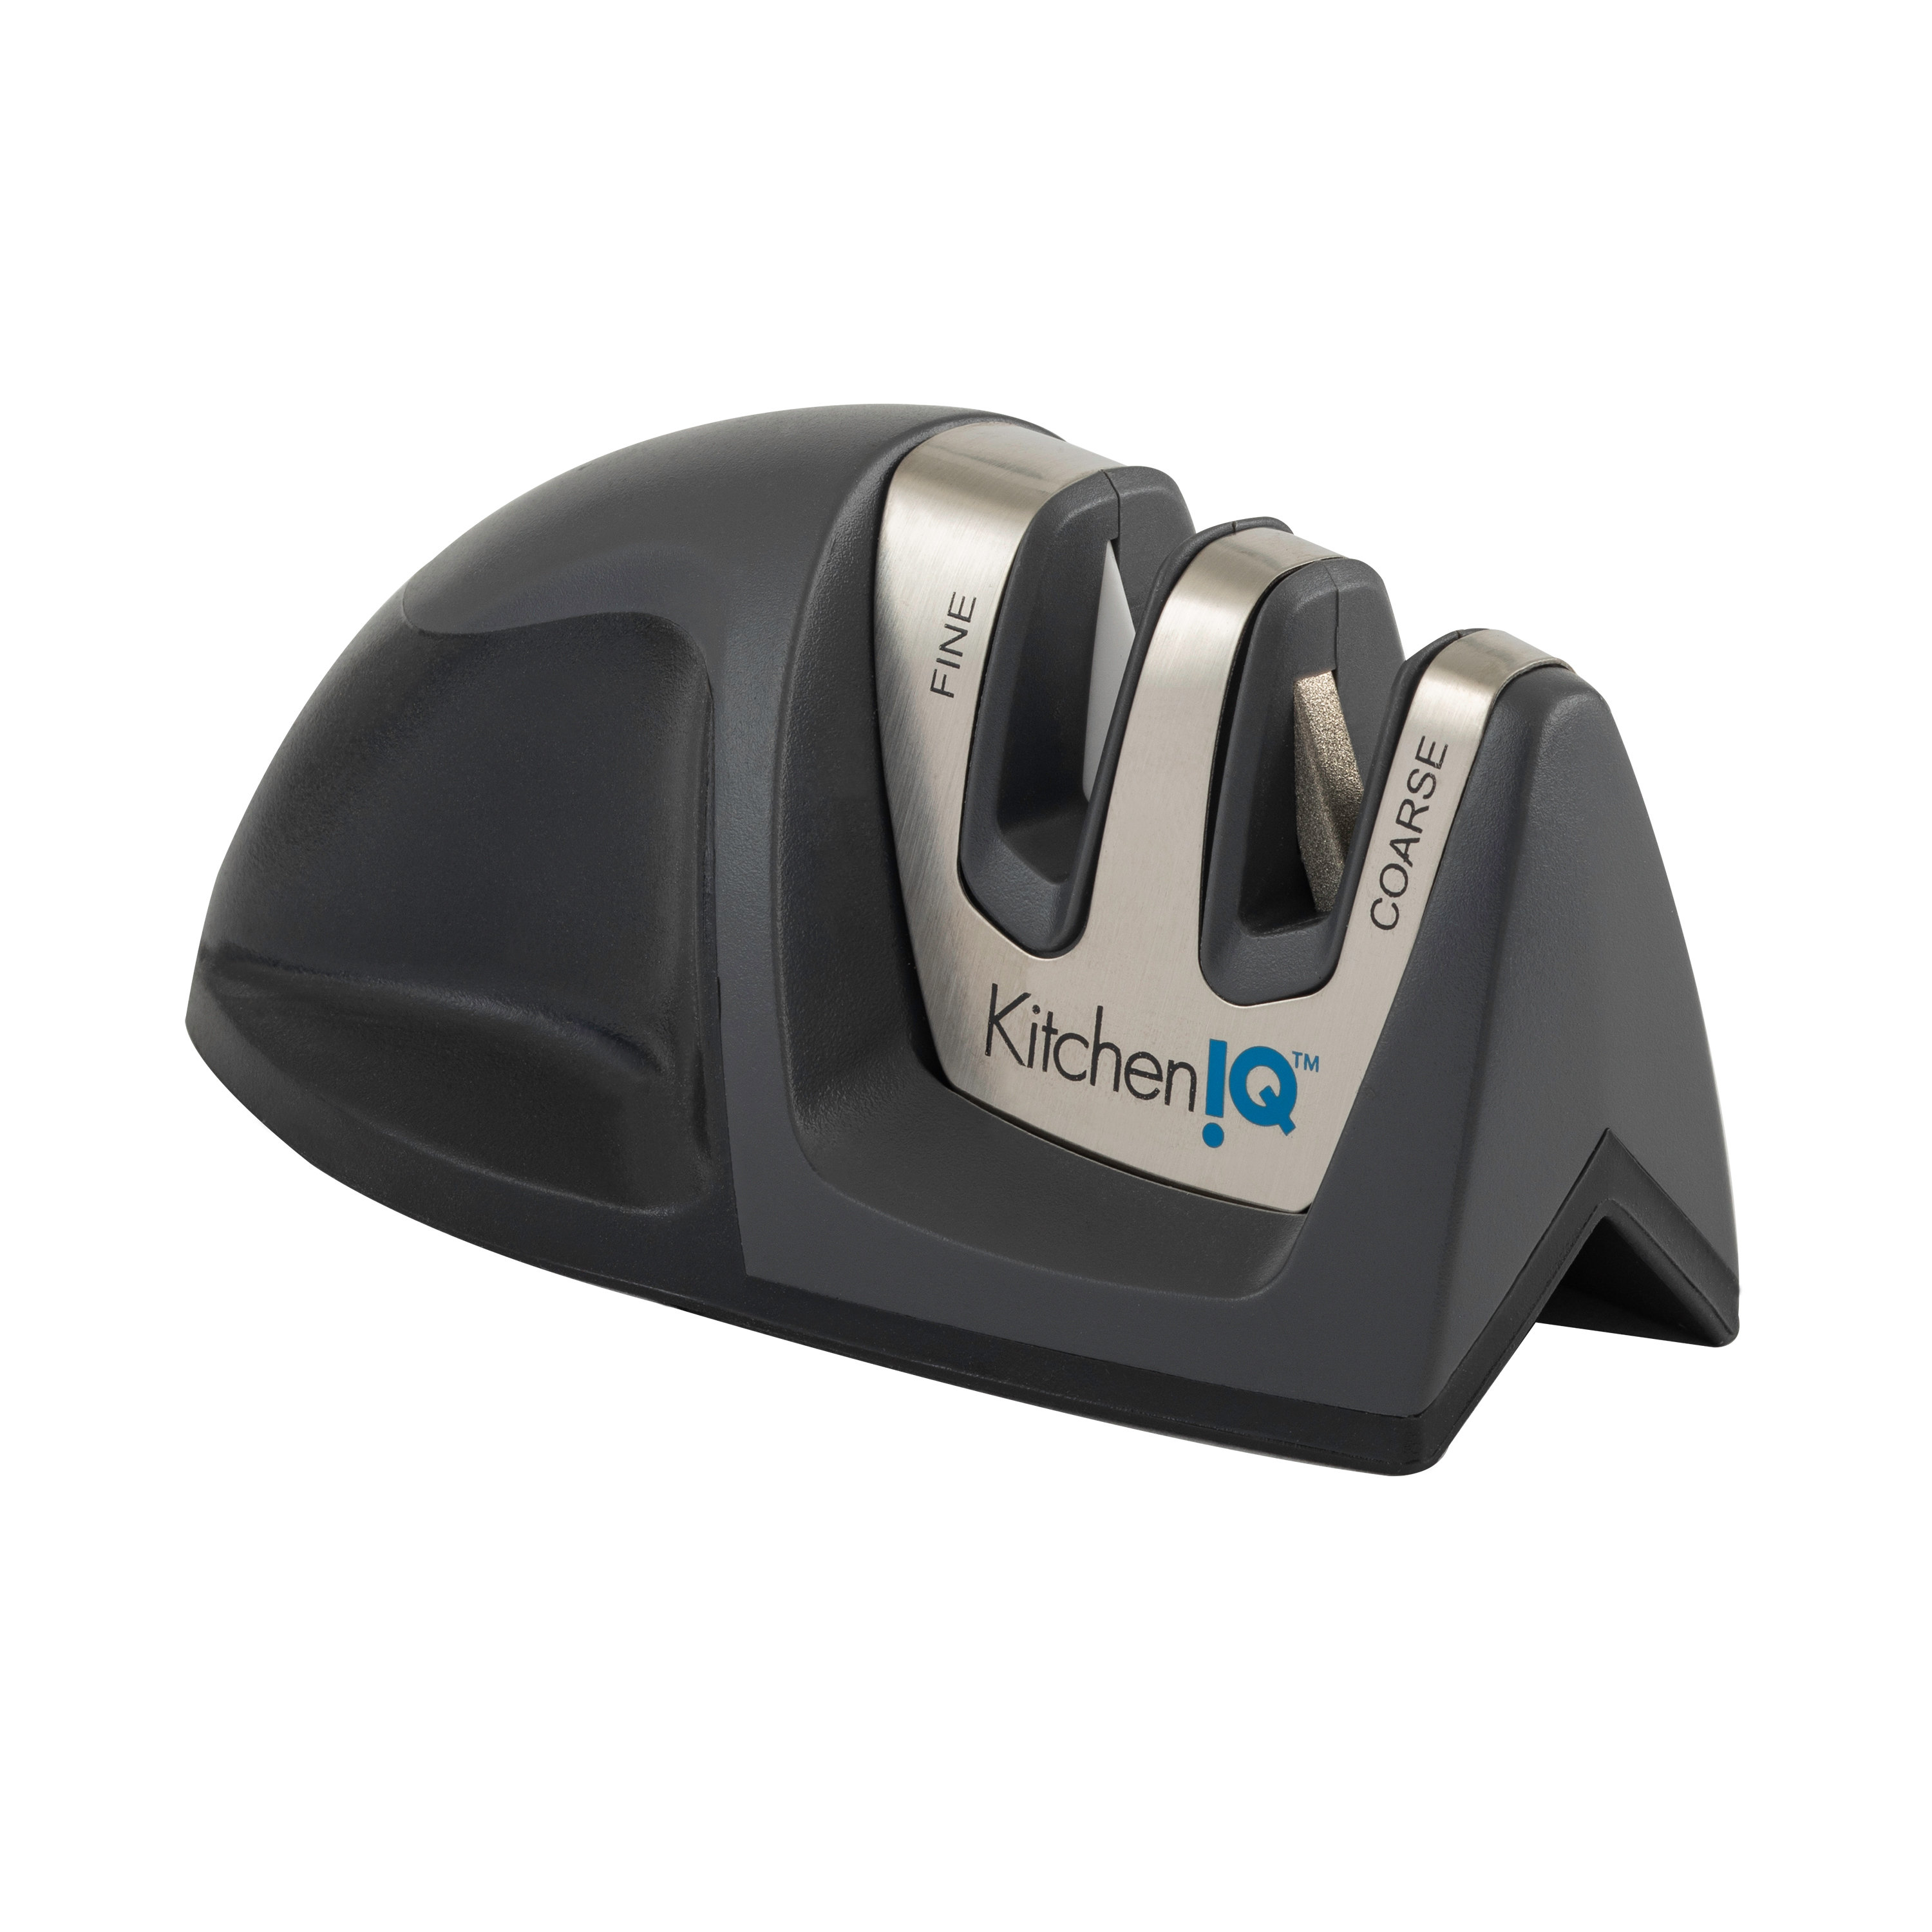 KitchenIQ Knife Sharpener Review and Giveaway - The Little Kitchen